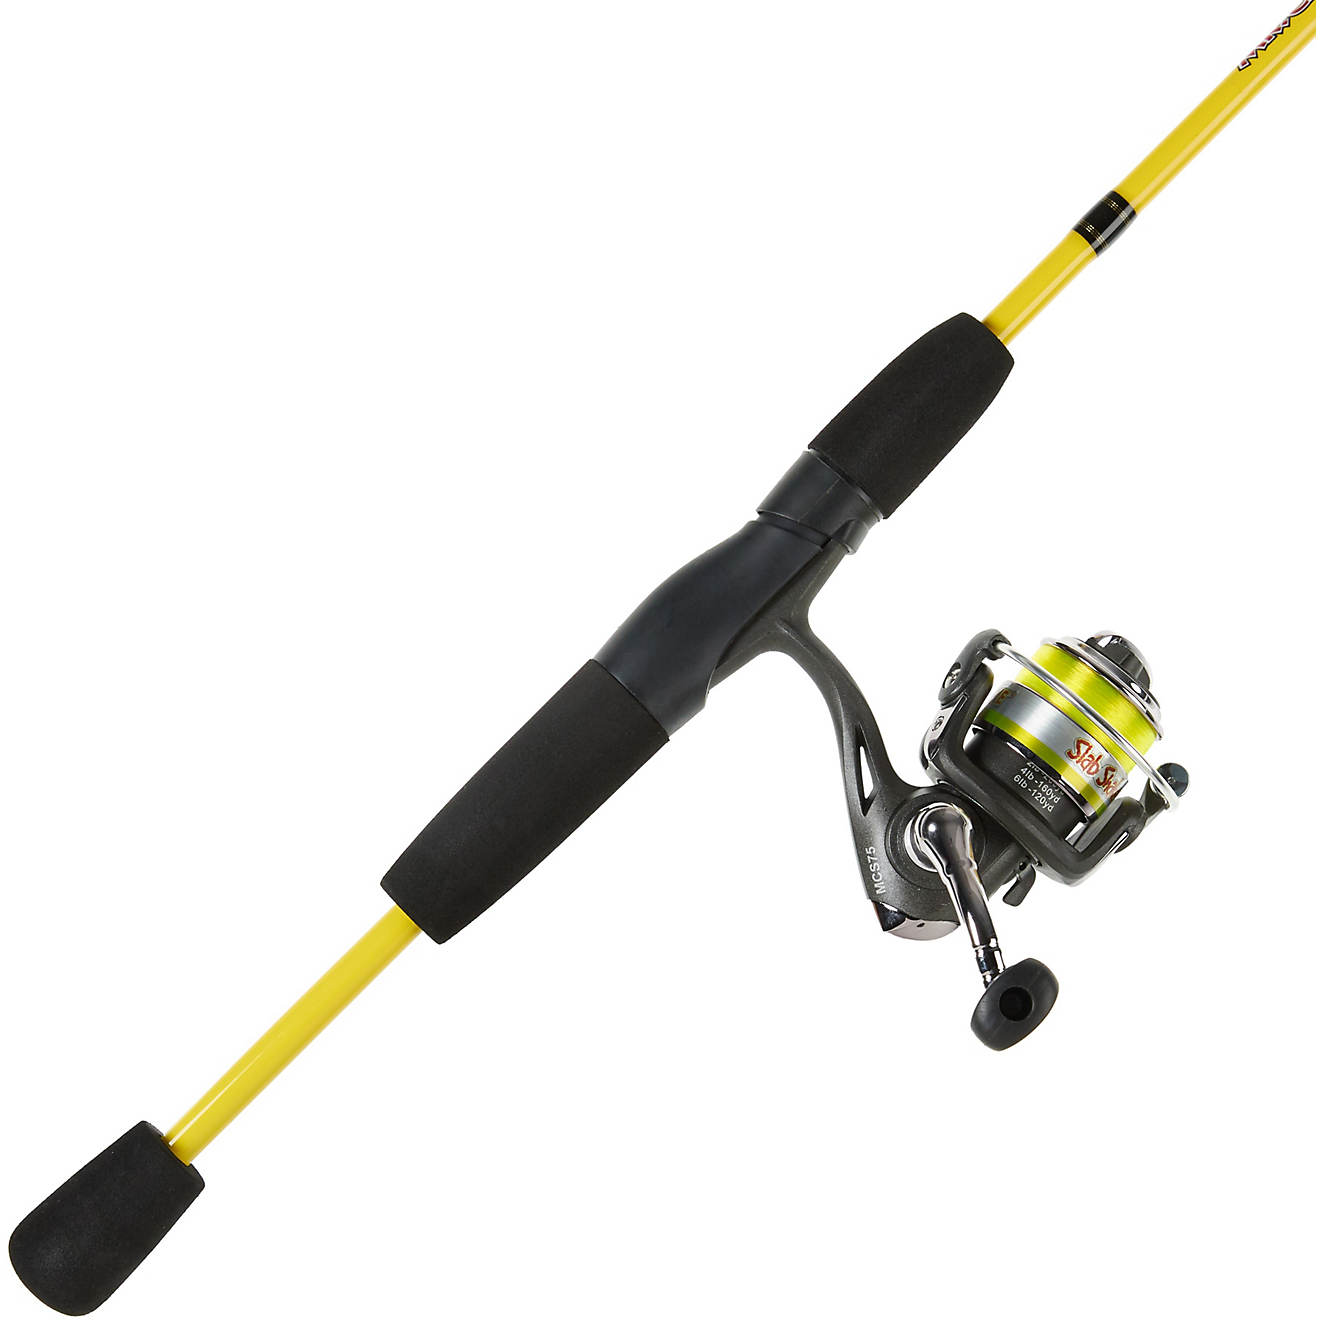 Mr. Crappie Slab Shaker 75 7 ft L Spinning Rod and Reel Combo                                                                    - view number 1